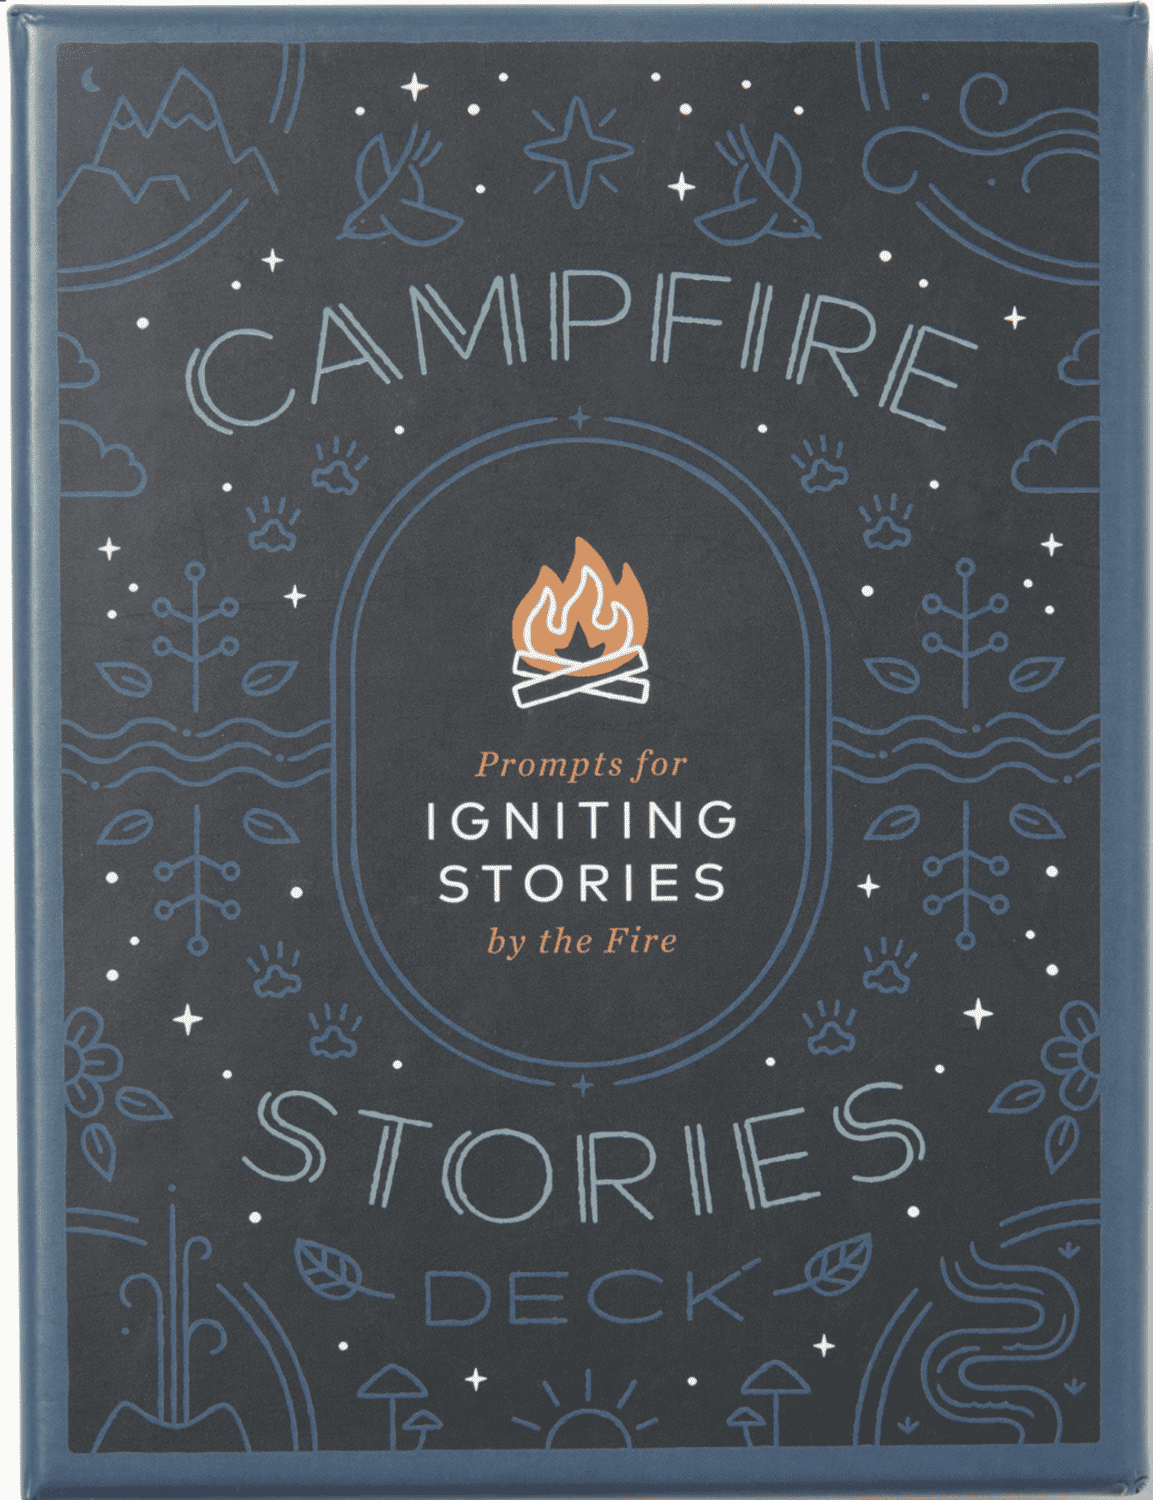 Campfires Stories Book from REI